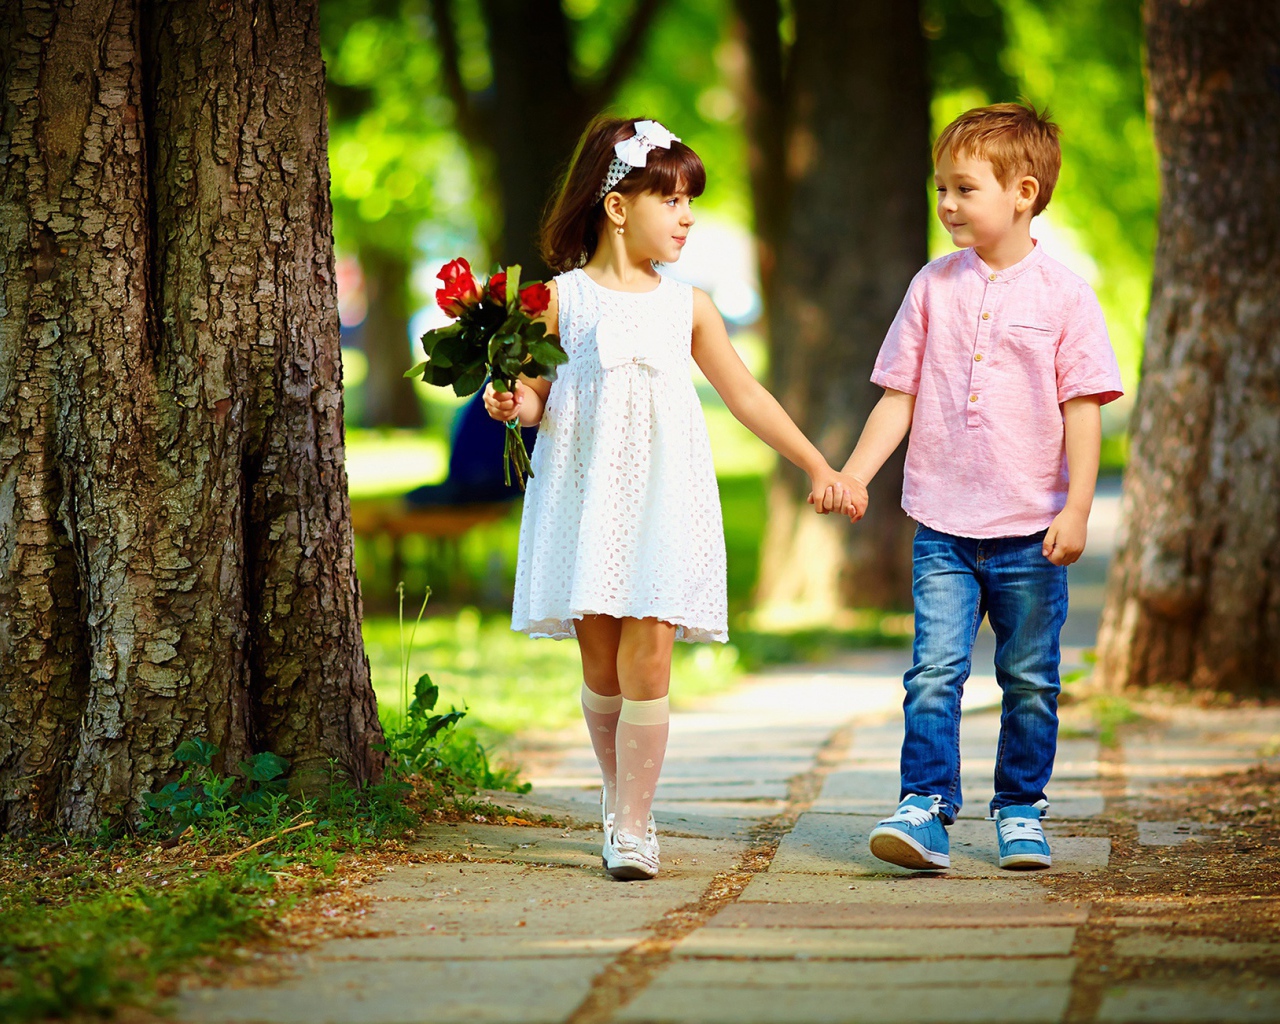 Boy and girl walk in the park